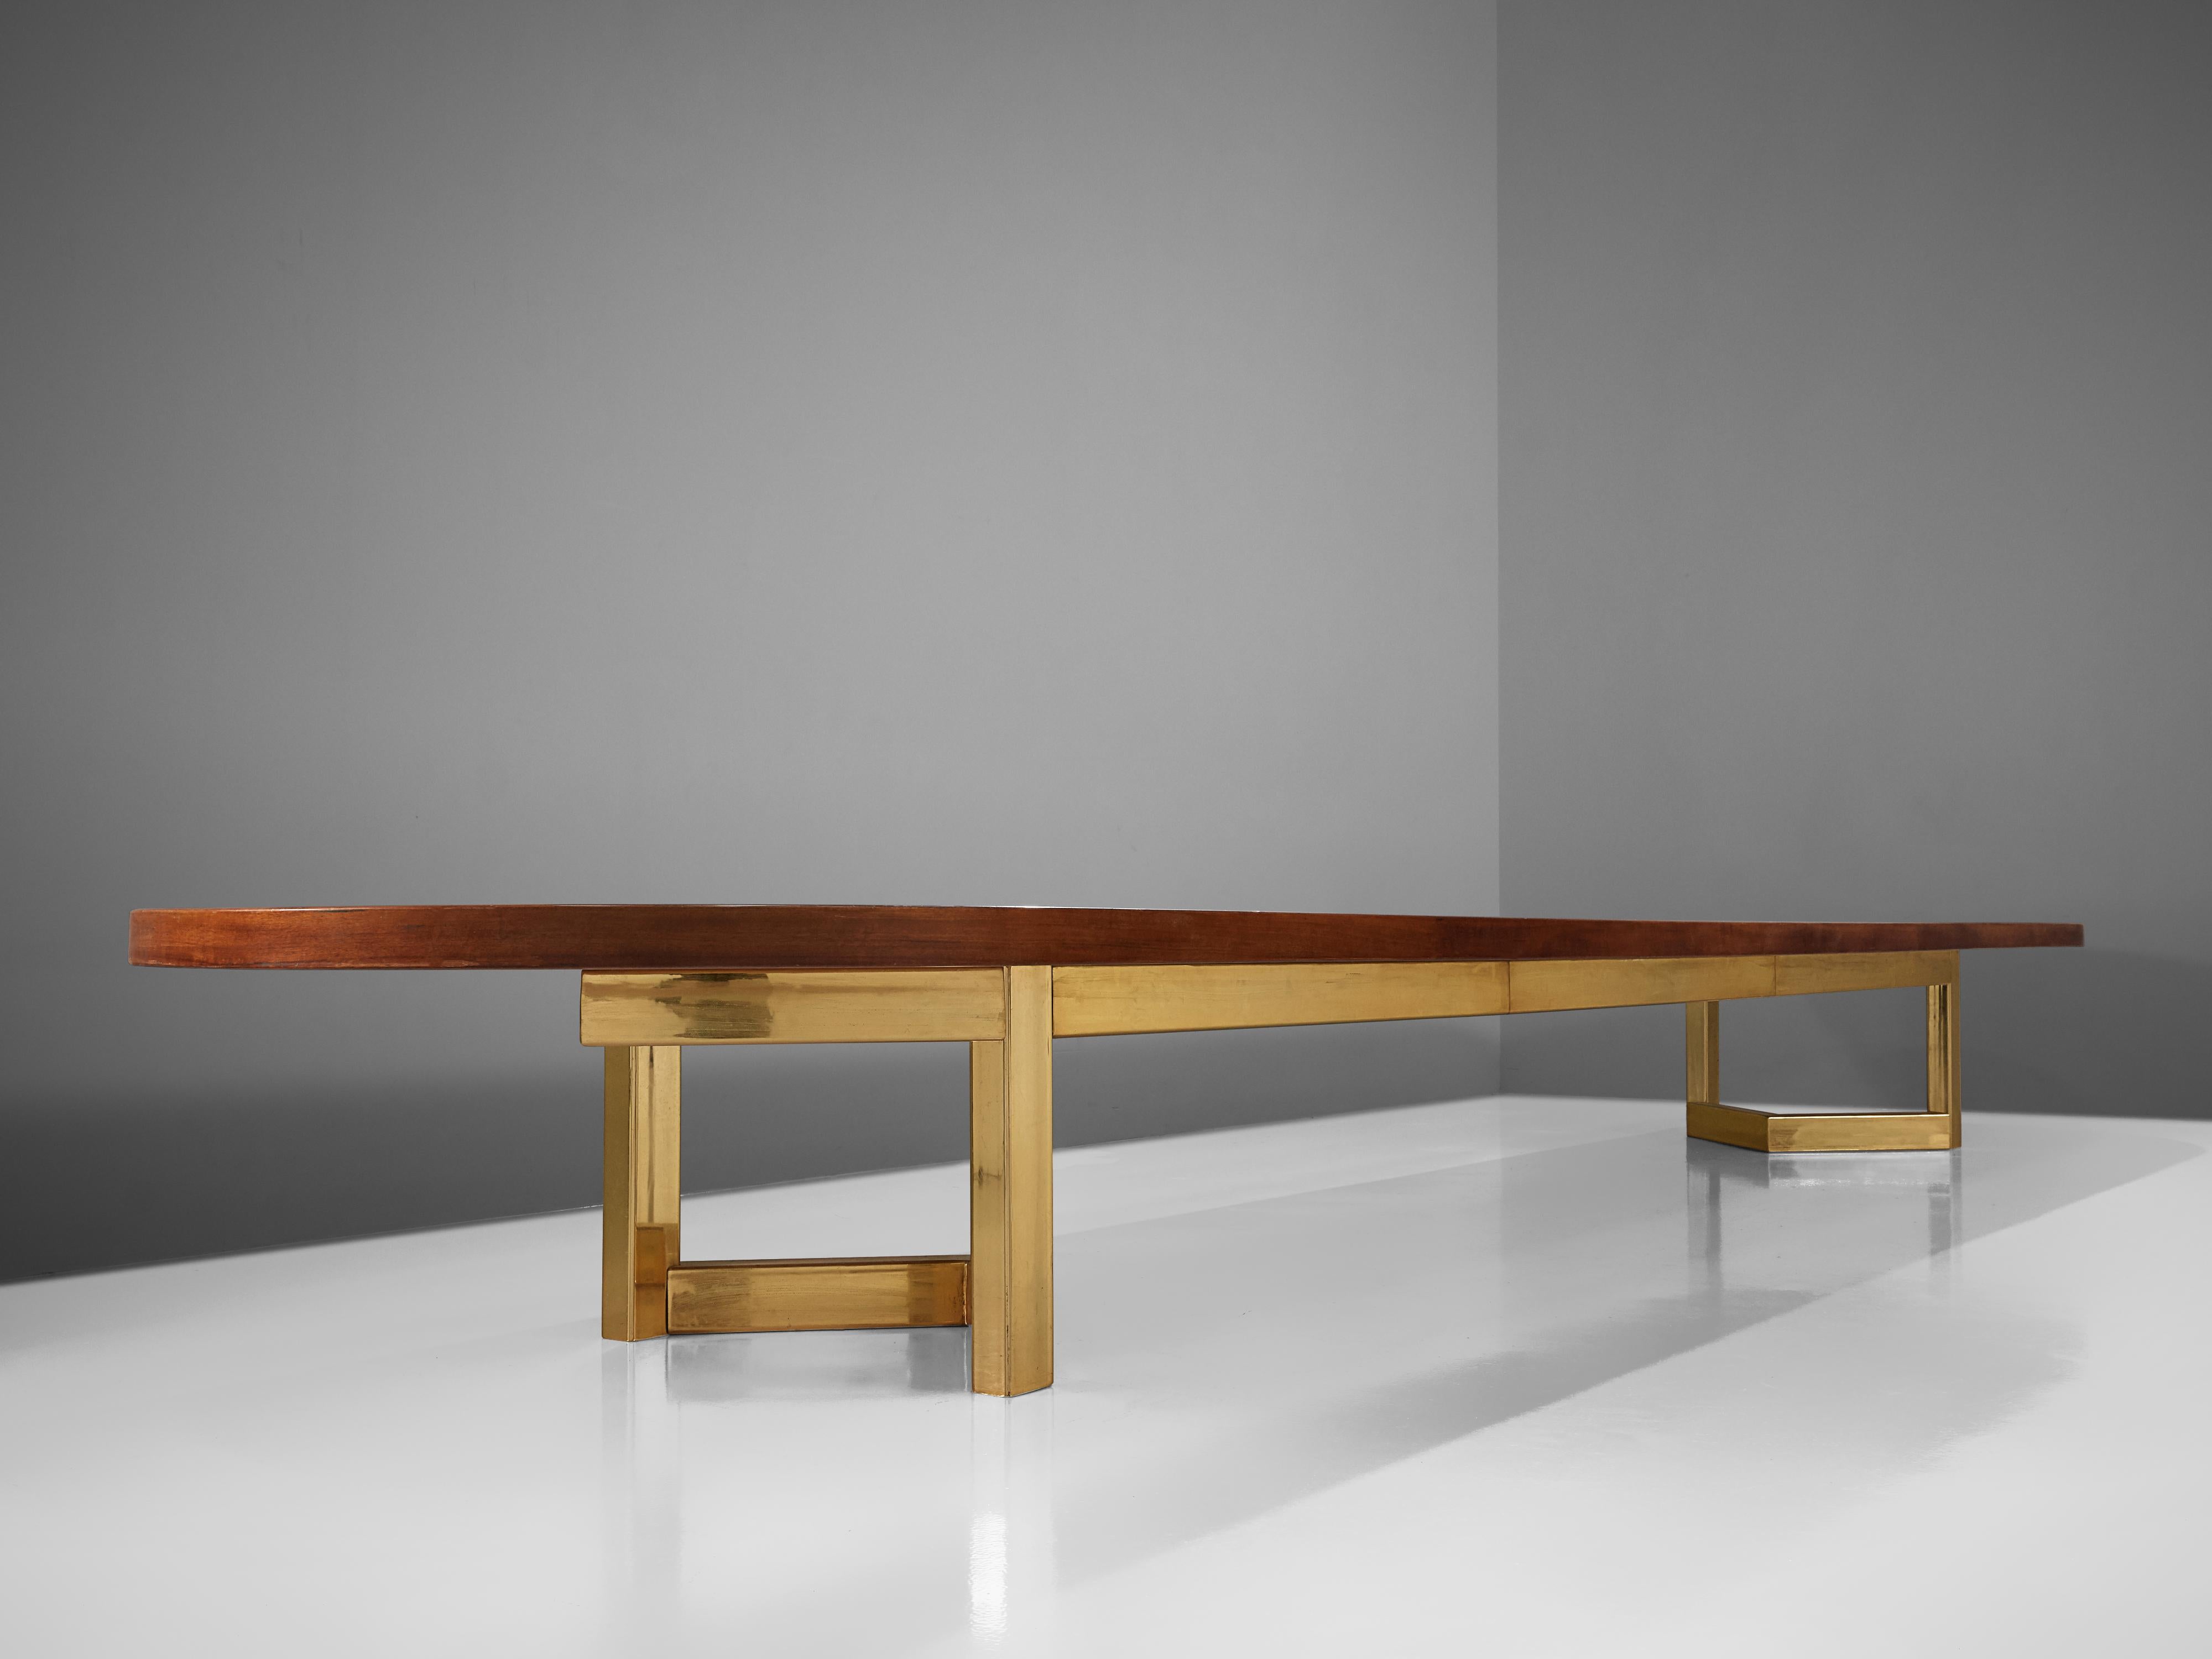 Large Conference Table in Walnut and Brass 7, 20 M / 23, 6 Ft Long 4